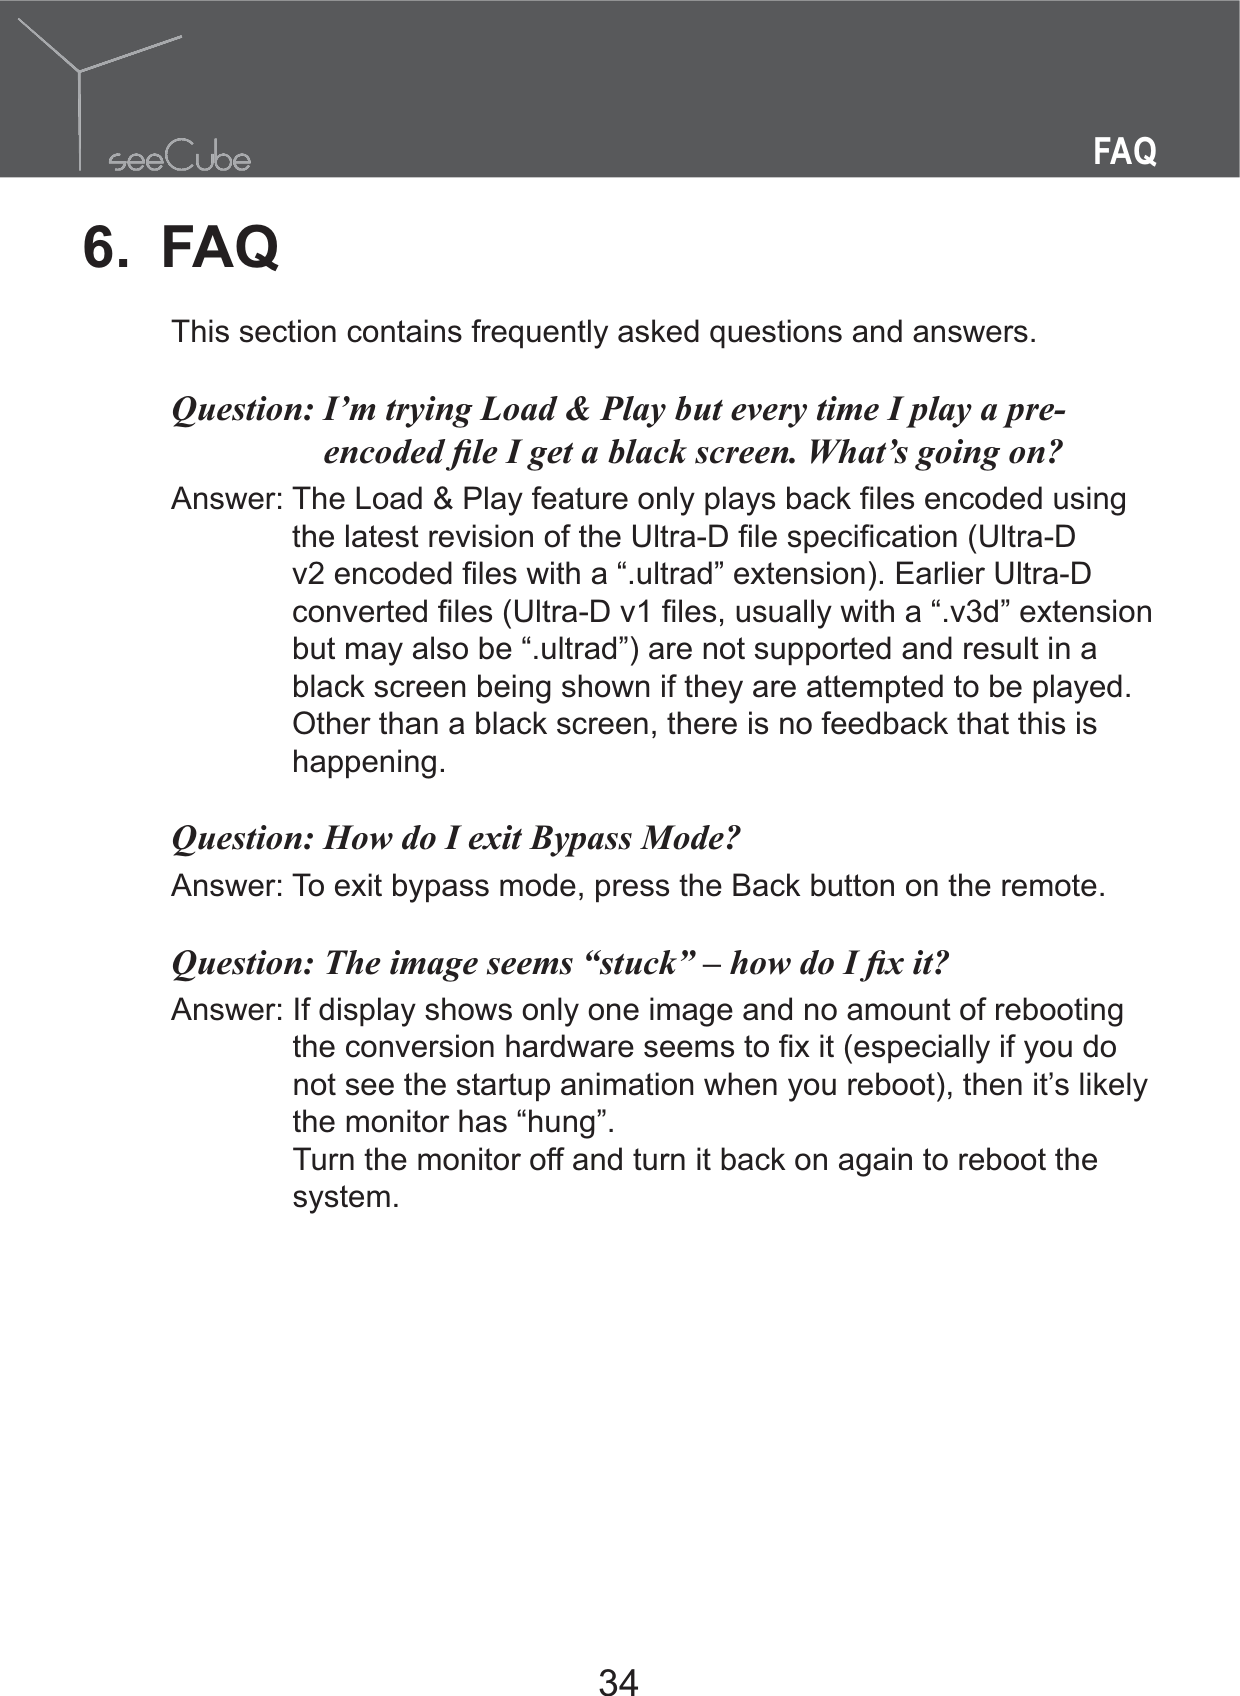 34FAQ6. FAQThis section contains frequently asked questions and answers.Question:  I’m trying Load &amp; Play but every time I play a pre-but may also be “.ultrad”) are not supported and result in a black screen being shown if they are attempted to be played. Other than a black screen, there is no feedback that this is happening.Answer:  To exit bypass mode, press the Back button on the remote. Answer:  If display shows only one image and no amount of rebooting not see the startup animation when you reboot), then it’s likely the monitor has “hung”. Turn the monitor off and turn it back on again to reboot the system.